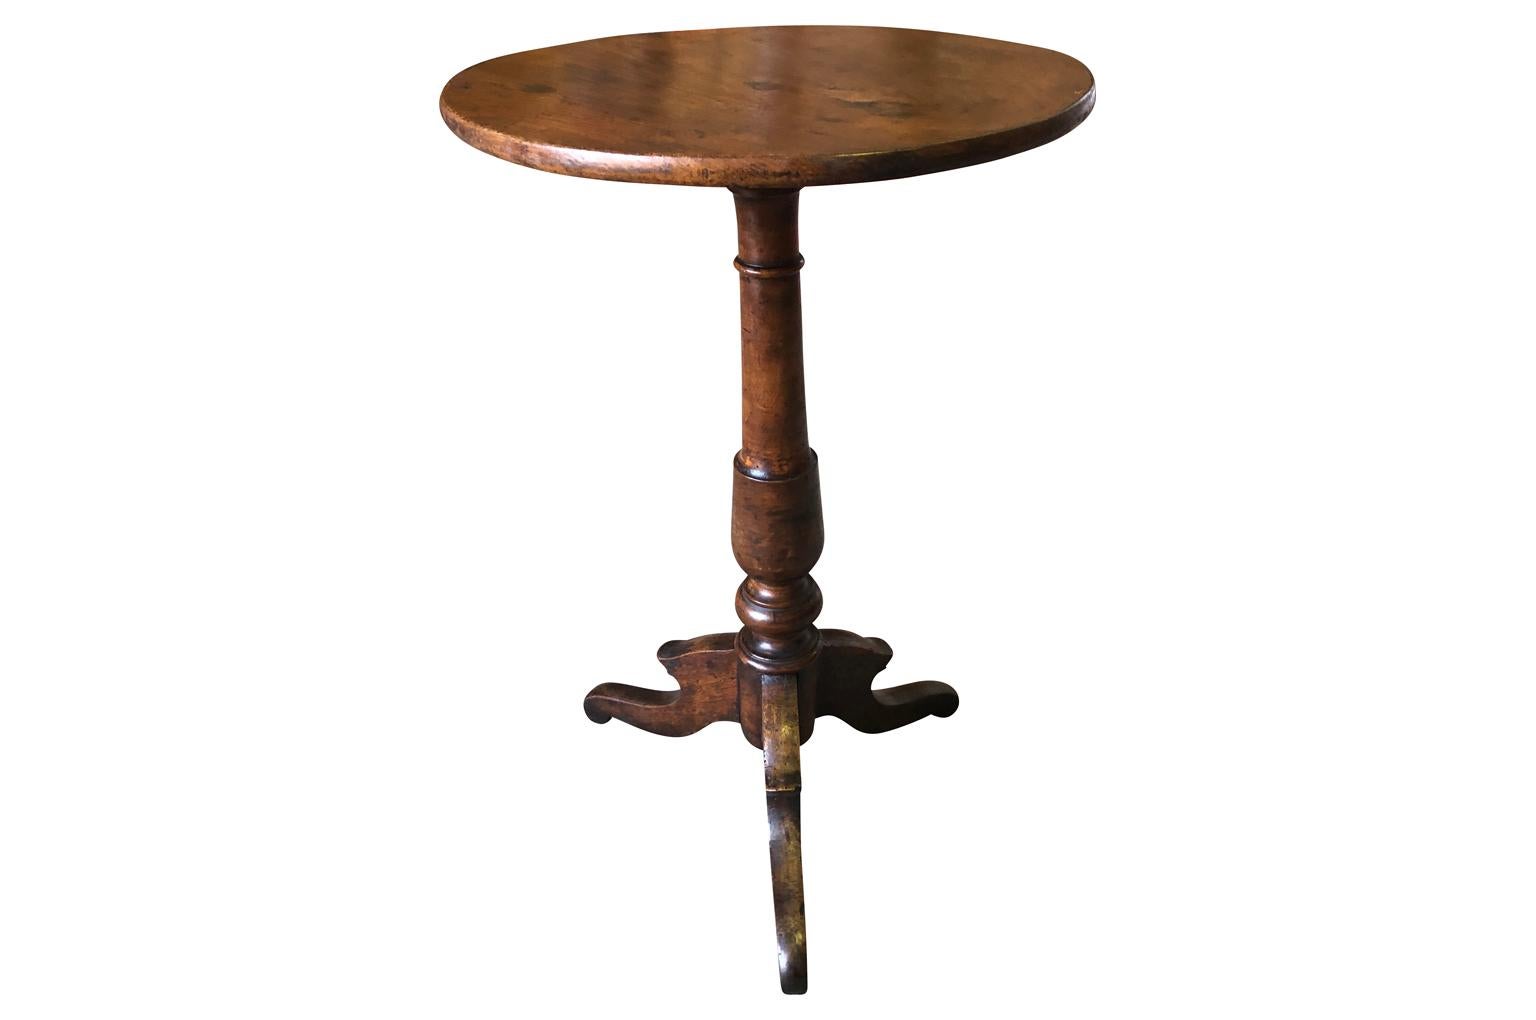 A charming 19th century Gueridon from the South of France handsomely constructed from walnut. Wonderful patina.